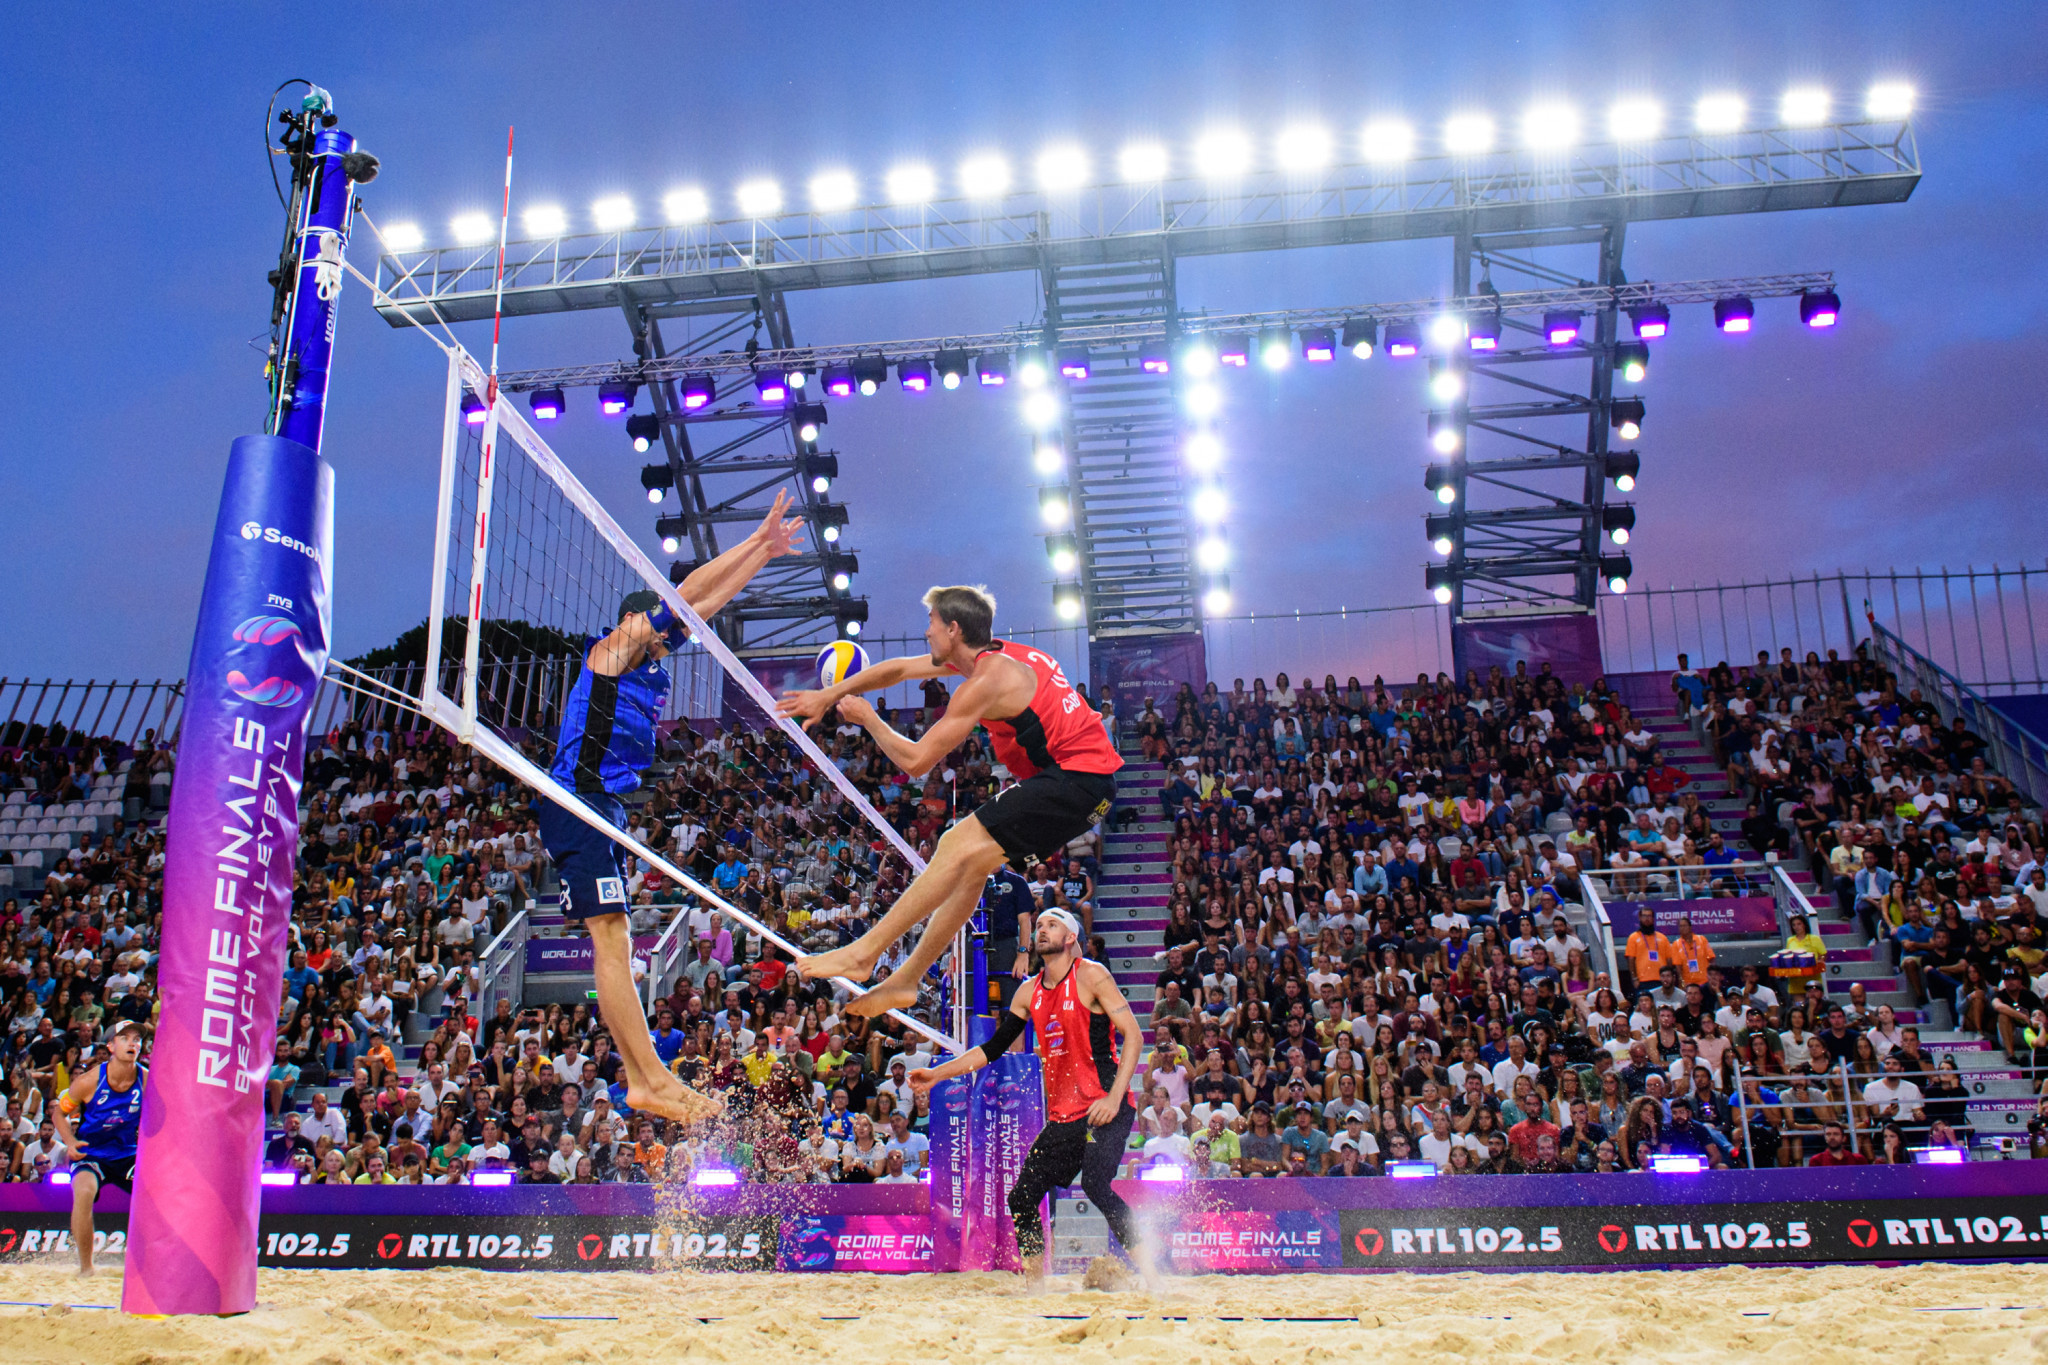 The new Volleyball World initiative is designed to enhance the experience of FIVB events such as the World Tour Finals and to expand global growth of the sport ©FIVB